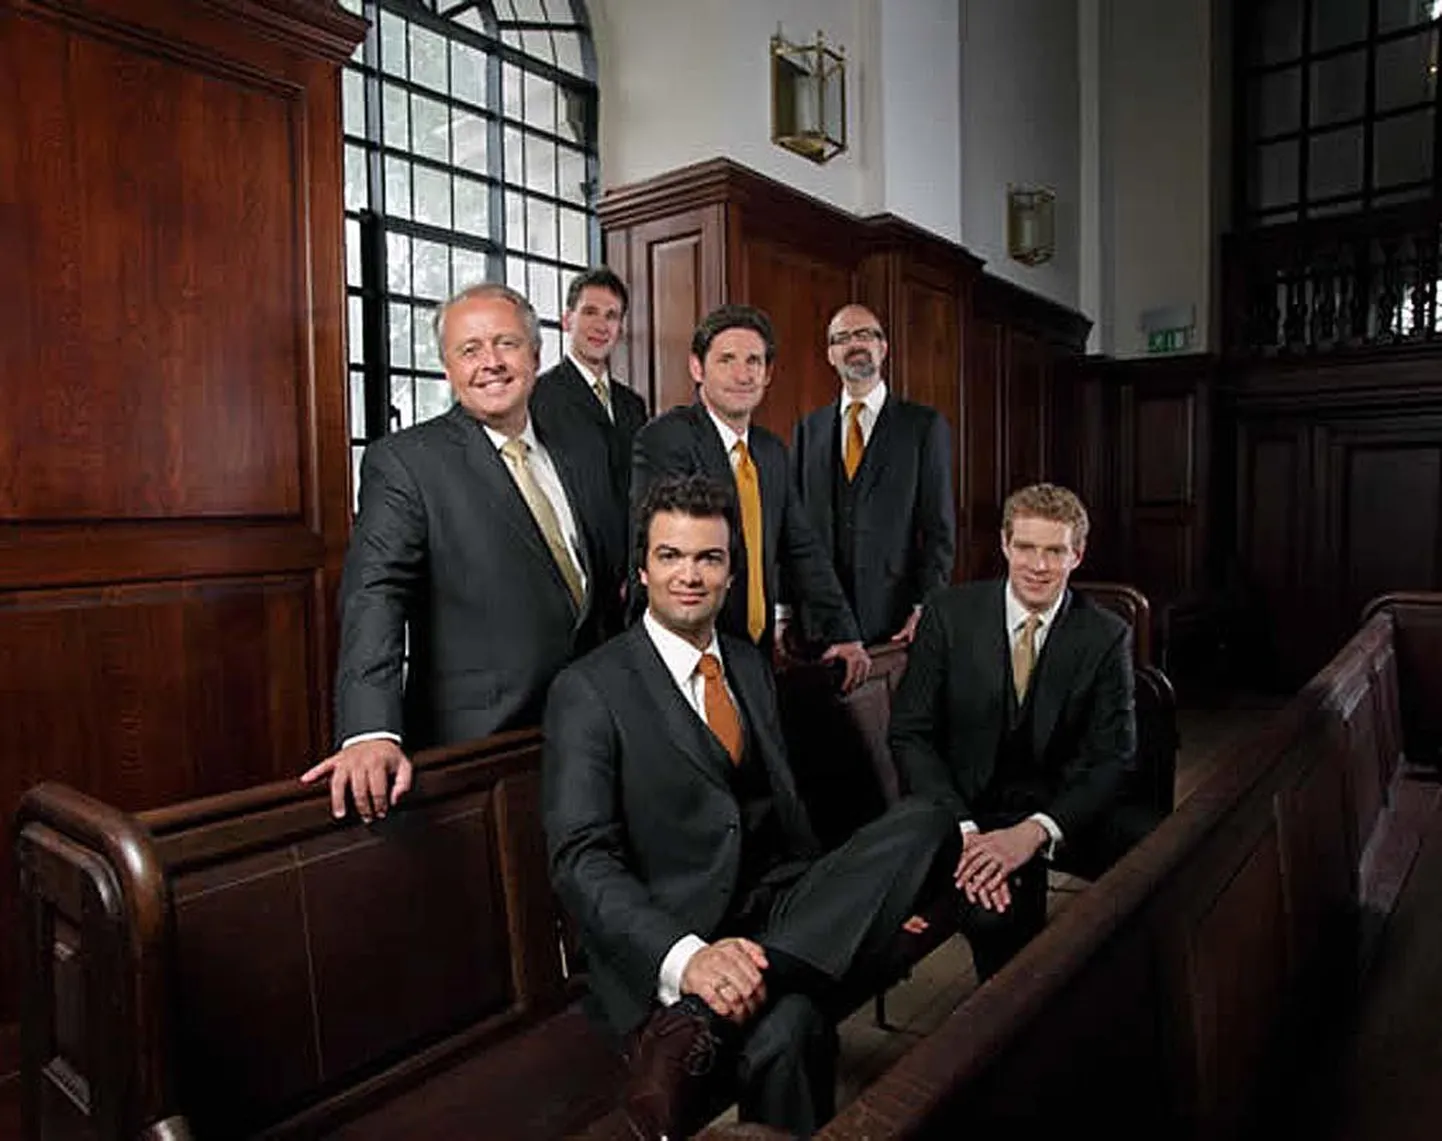 The King's Singers.